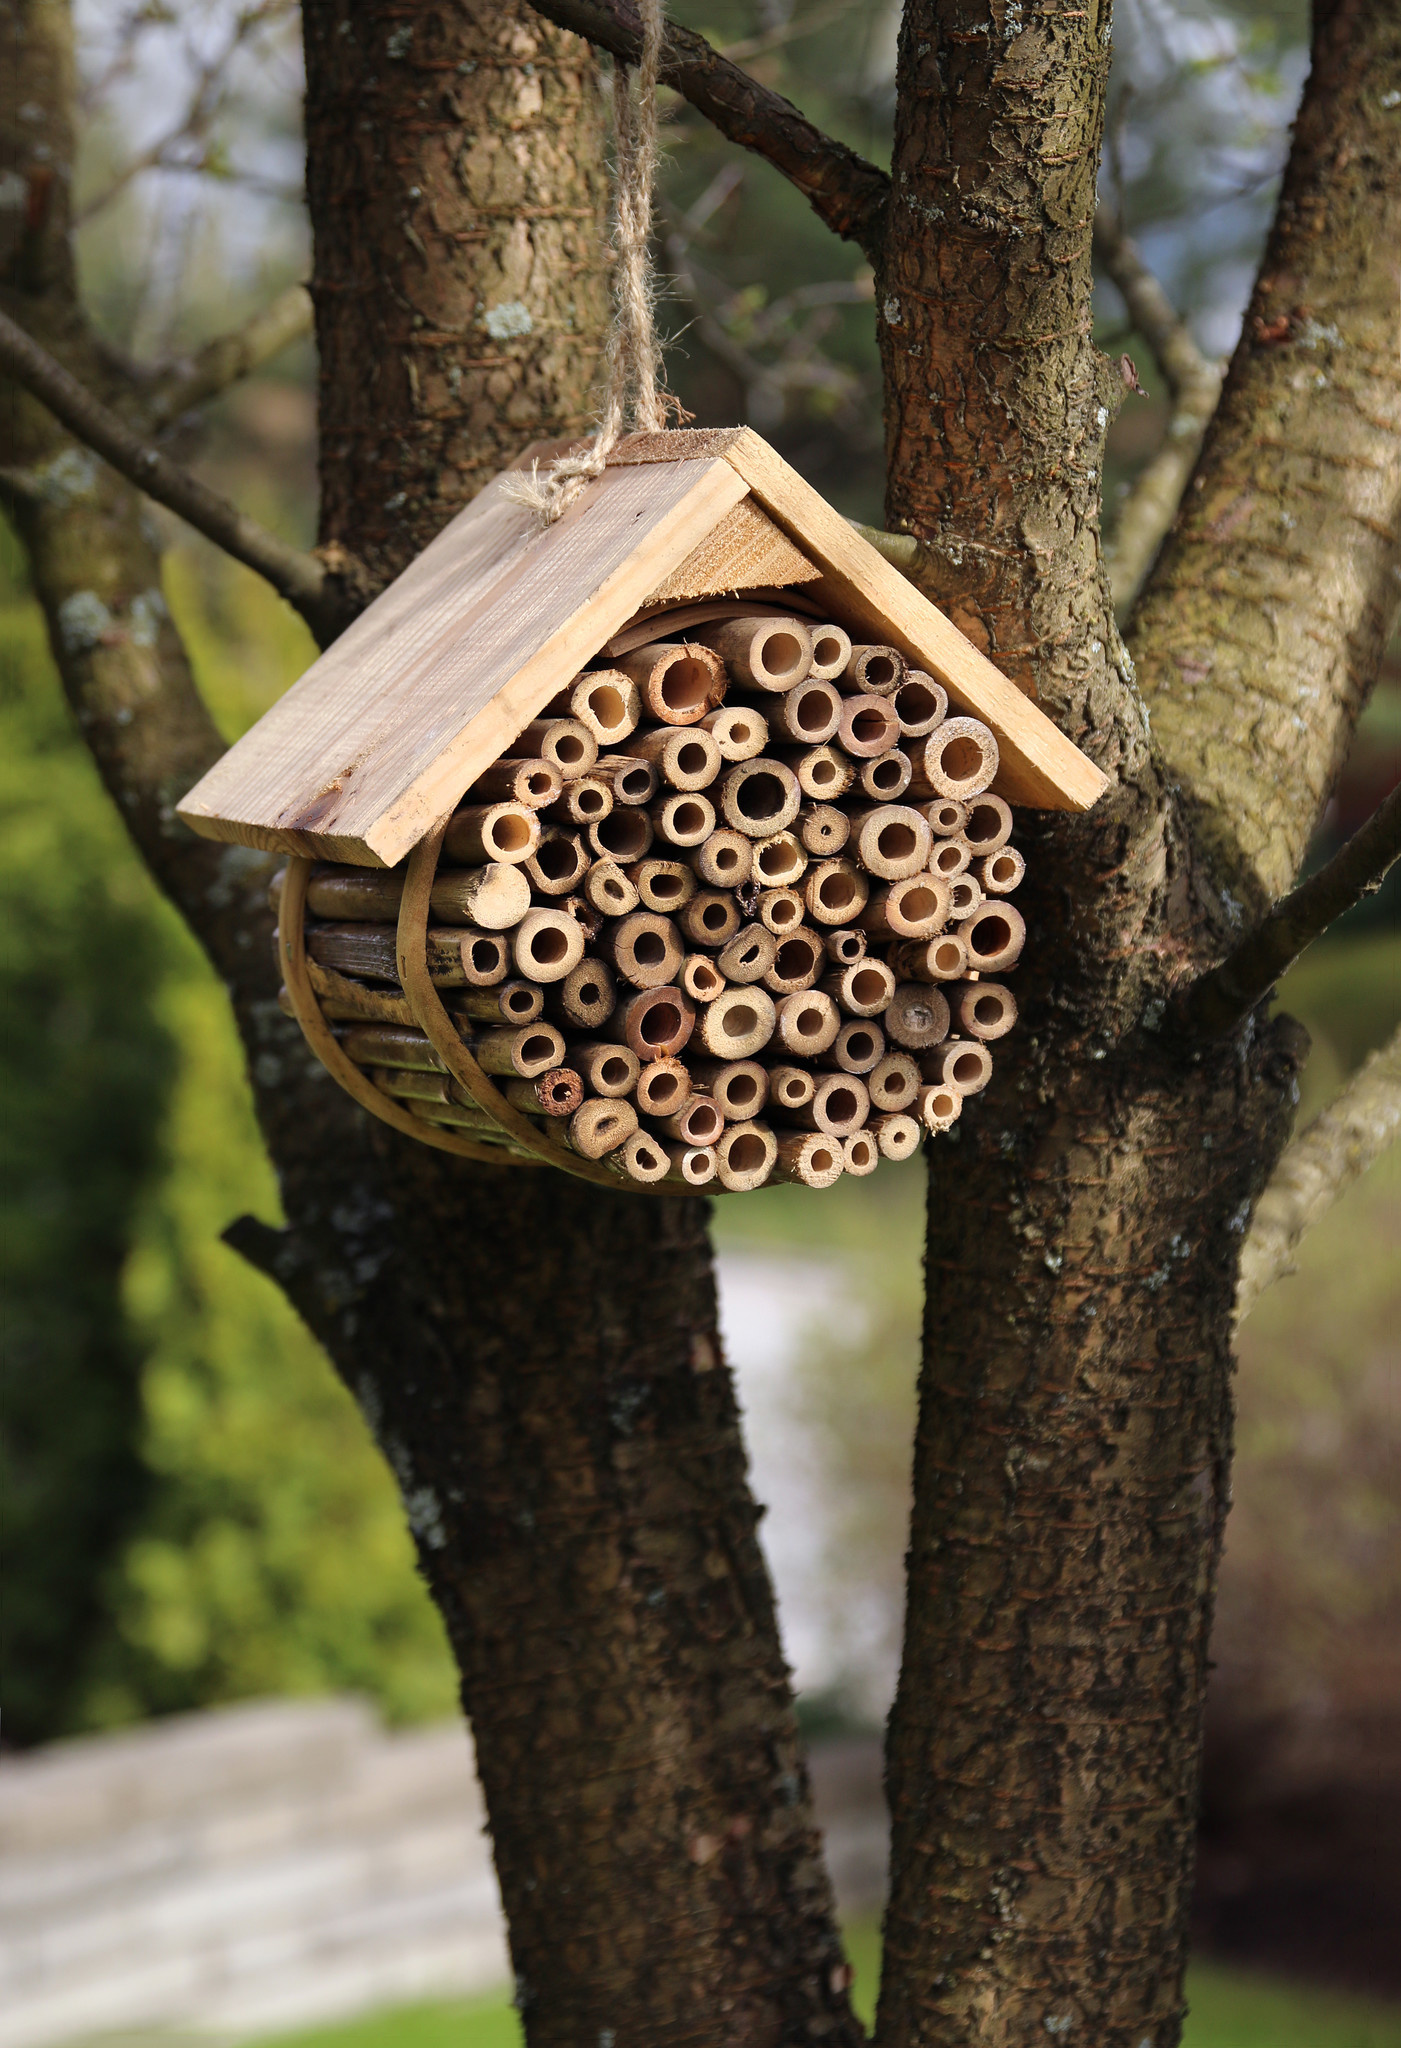 All about the insect house